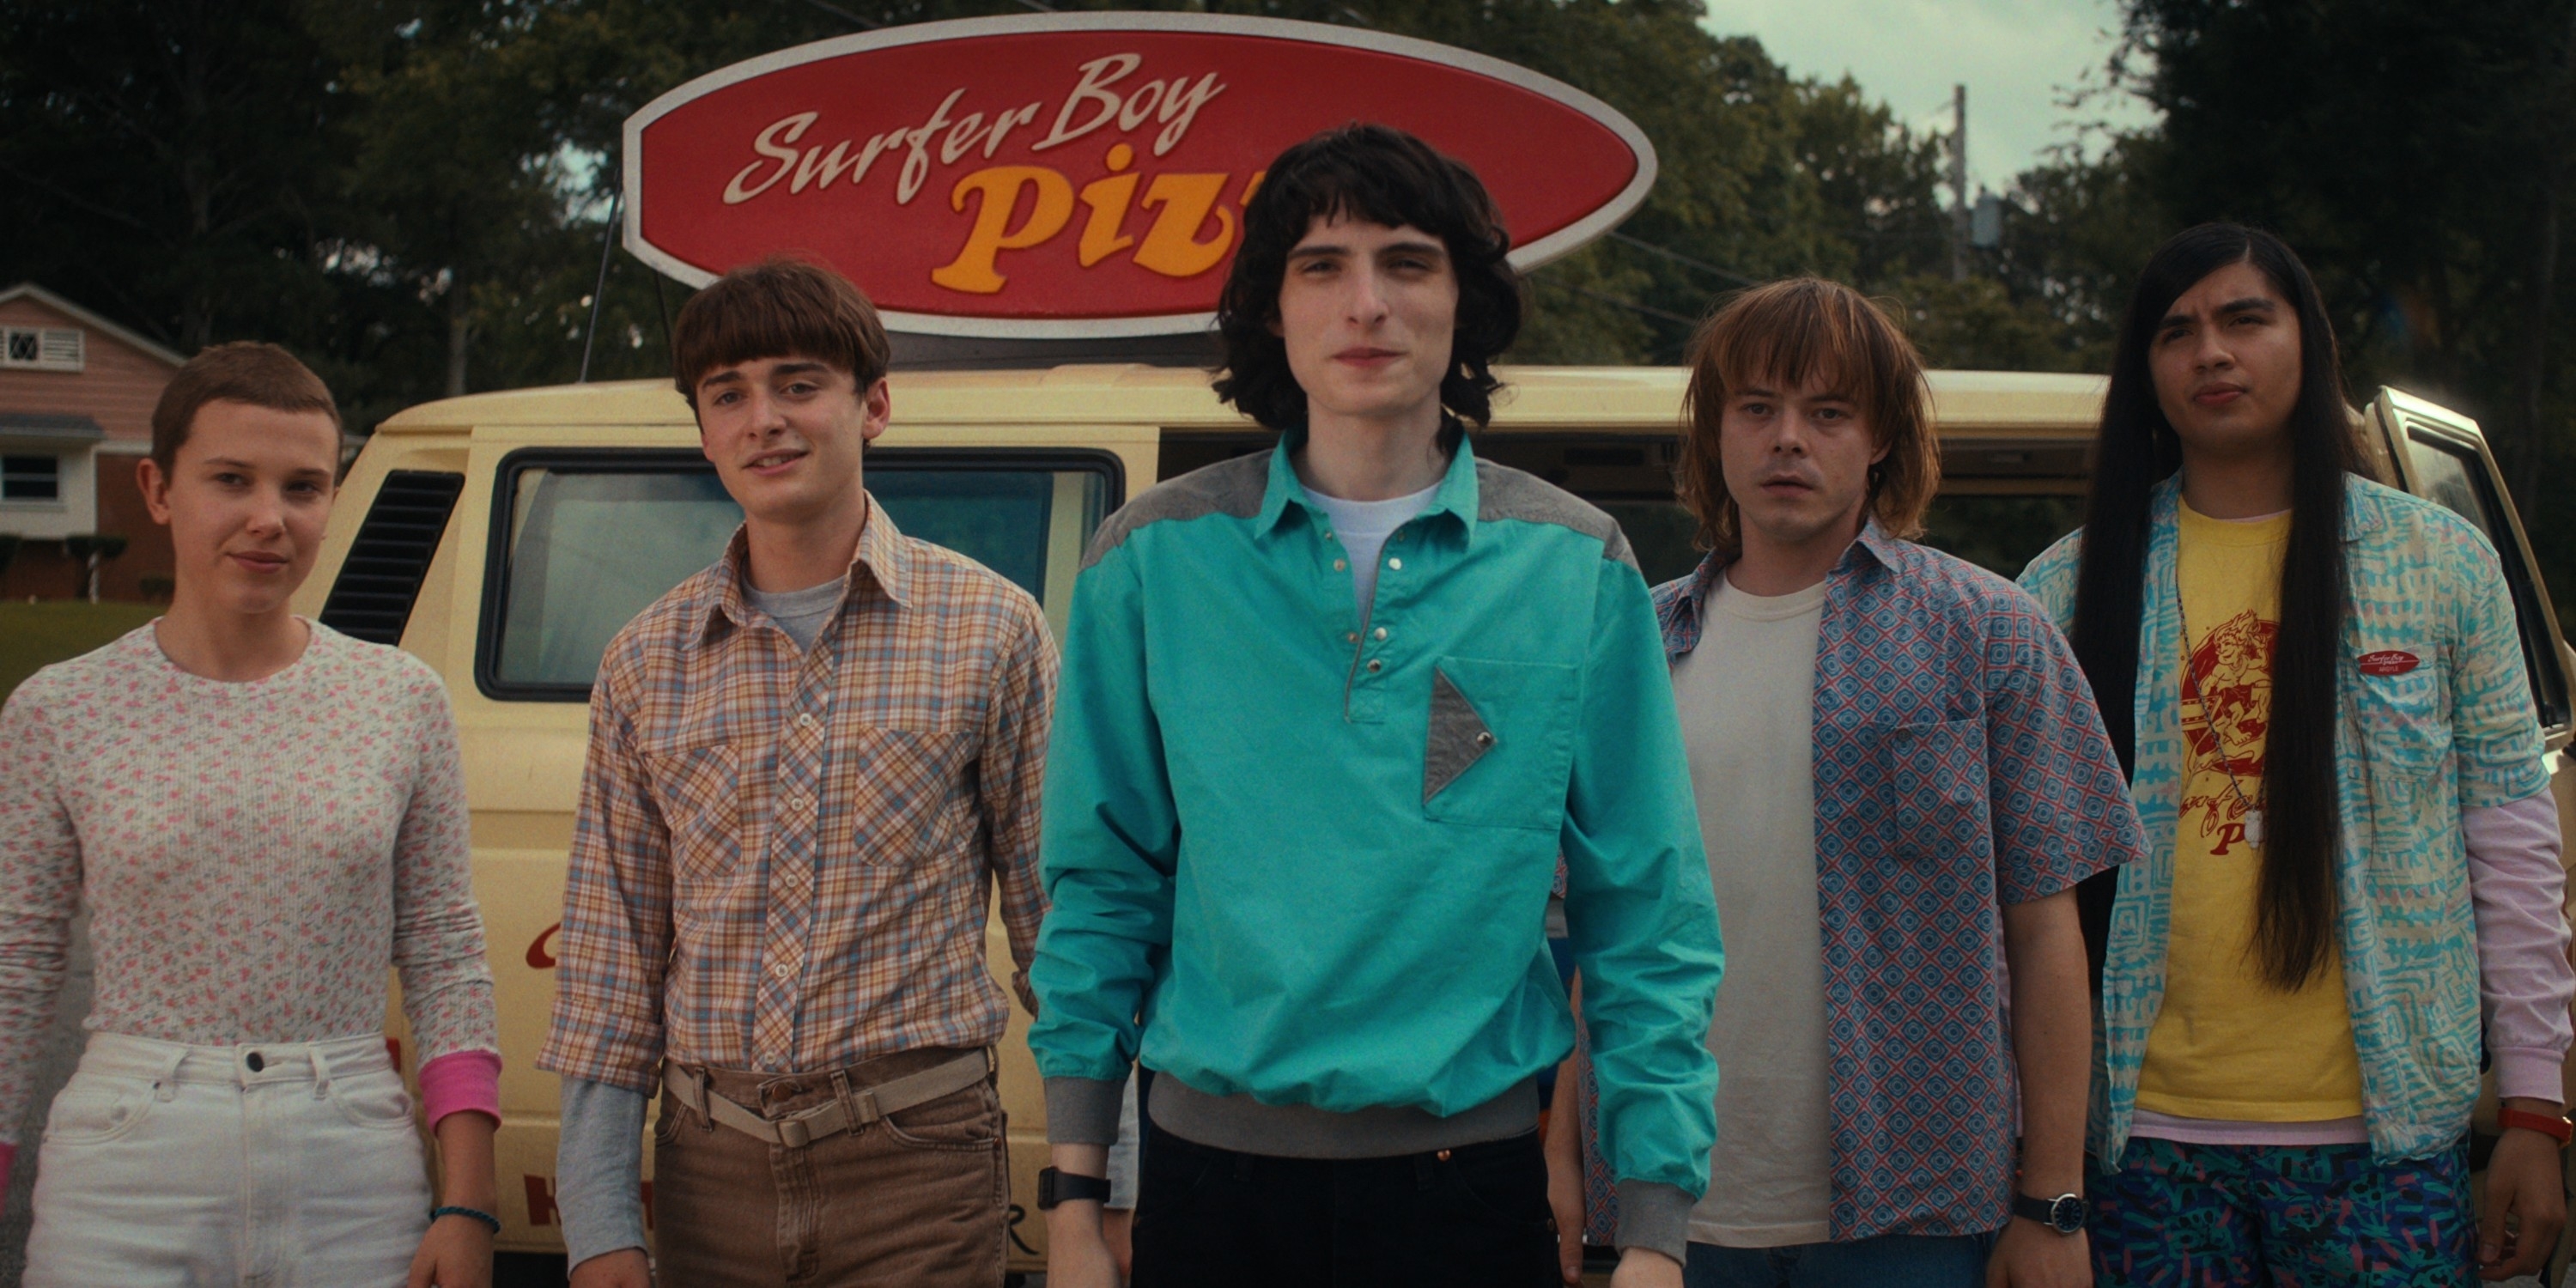 Characters from the show &#x27;Stranger Things&#x27; standing in front of Surfer Boy Pizza. They are dressed in 80s casual wear